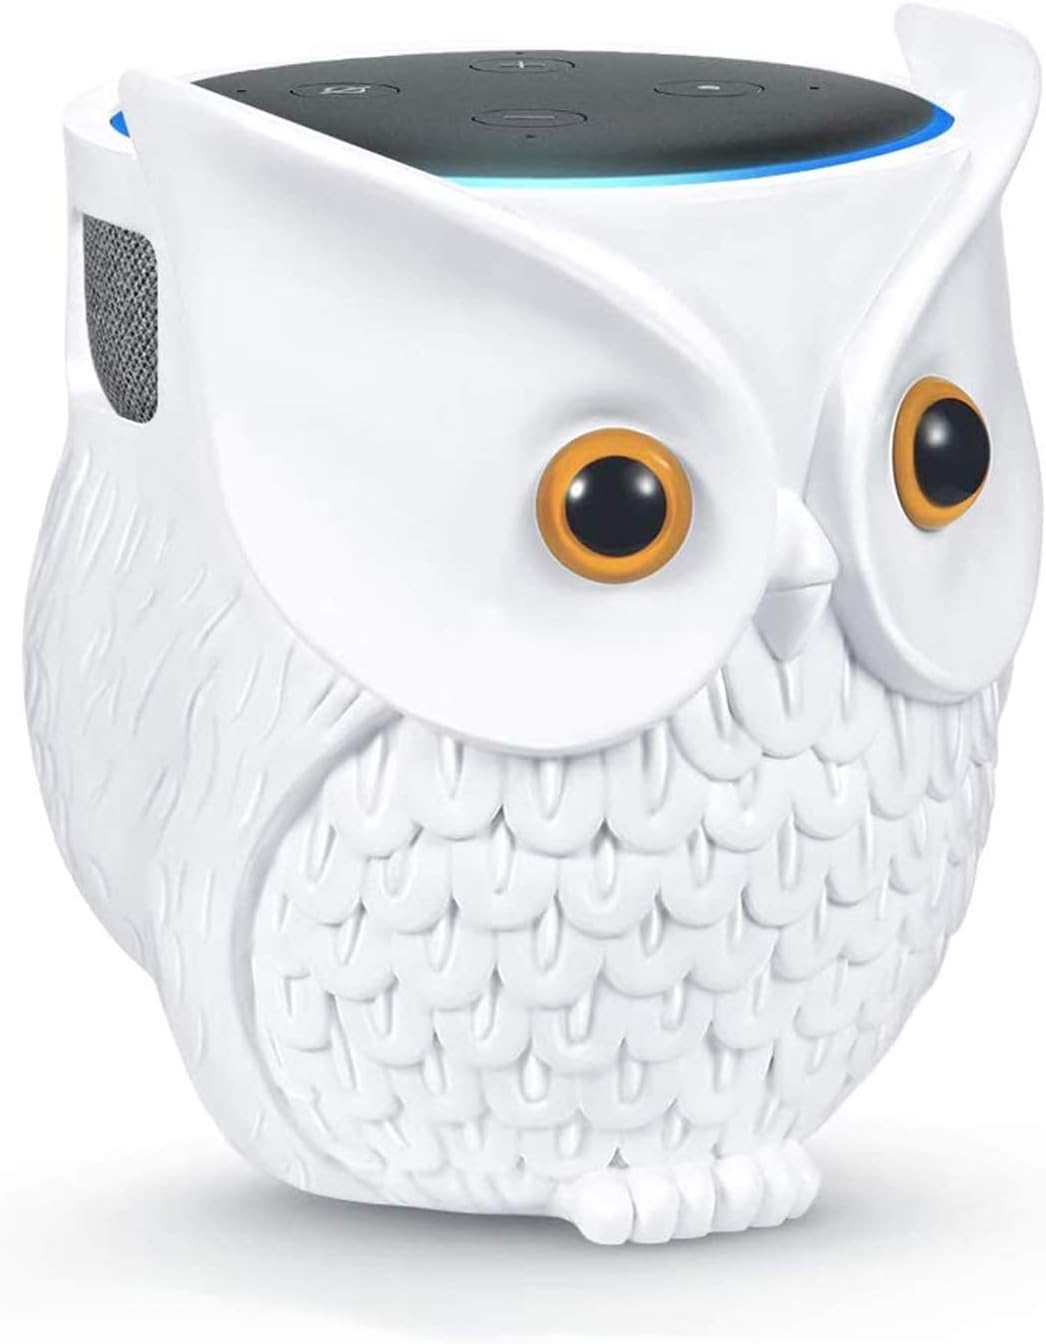 LDYAN Echo Dot Owl Holder Stand: A Cute and Functional Speaker Stand Review